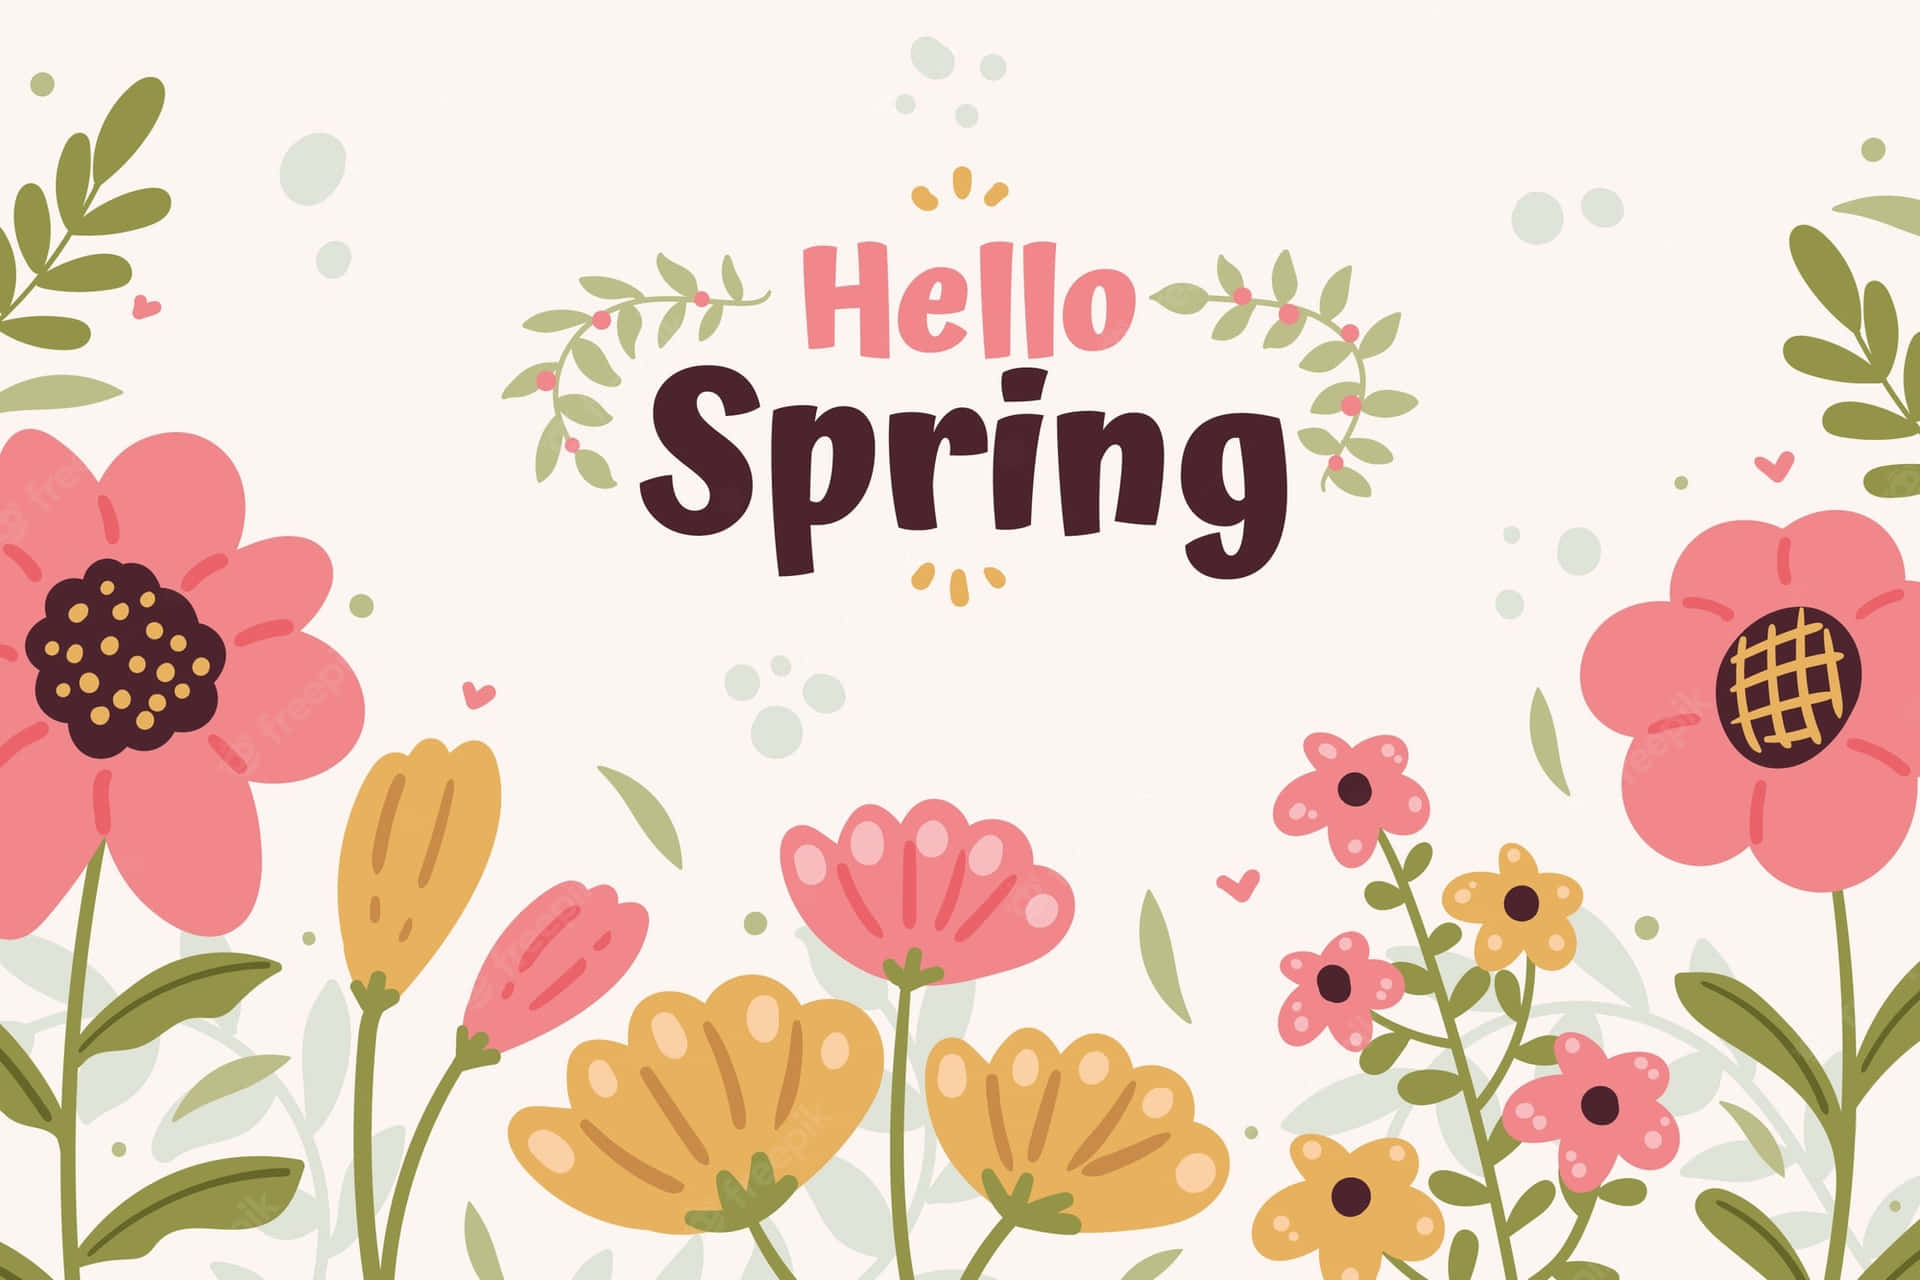 Hello Spring  Free Wallpaper Designs by Brittany Kalscheur on Dribbble